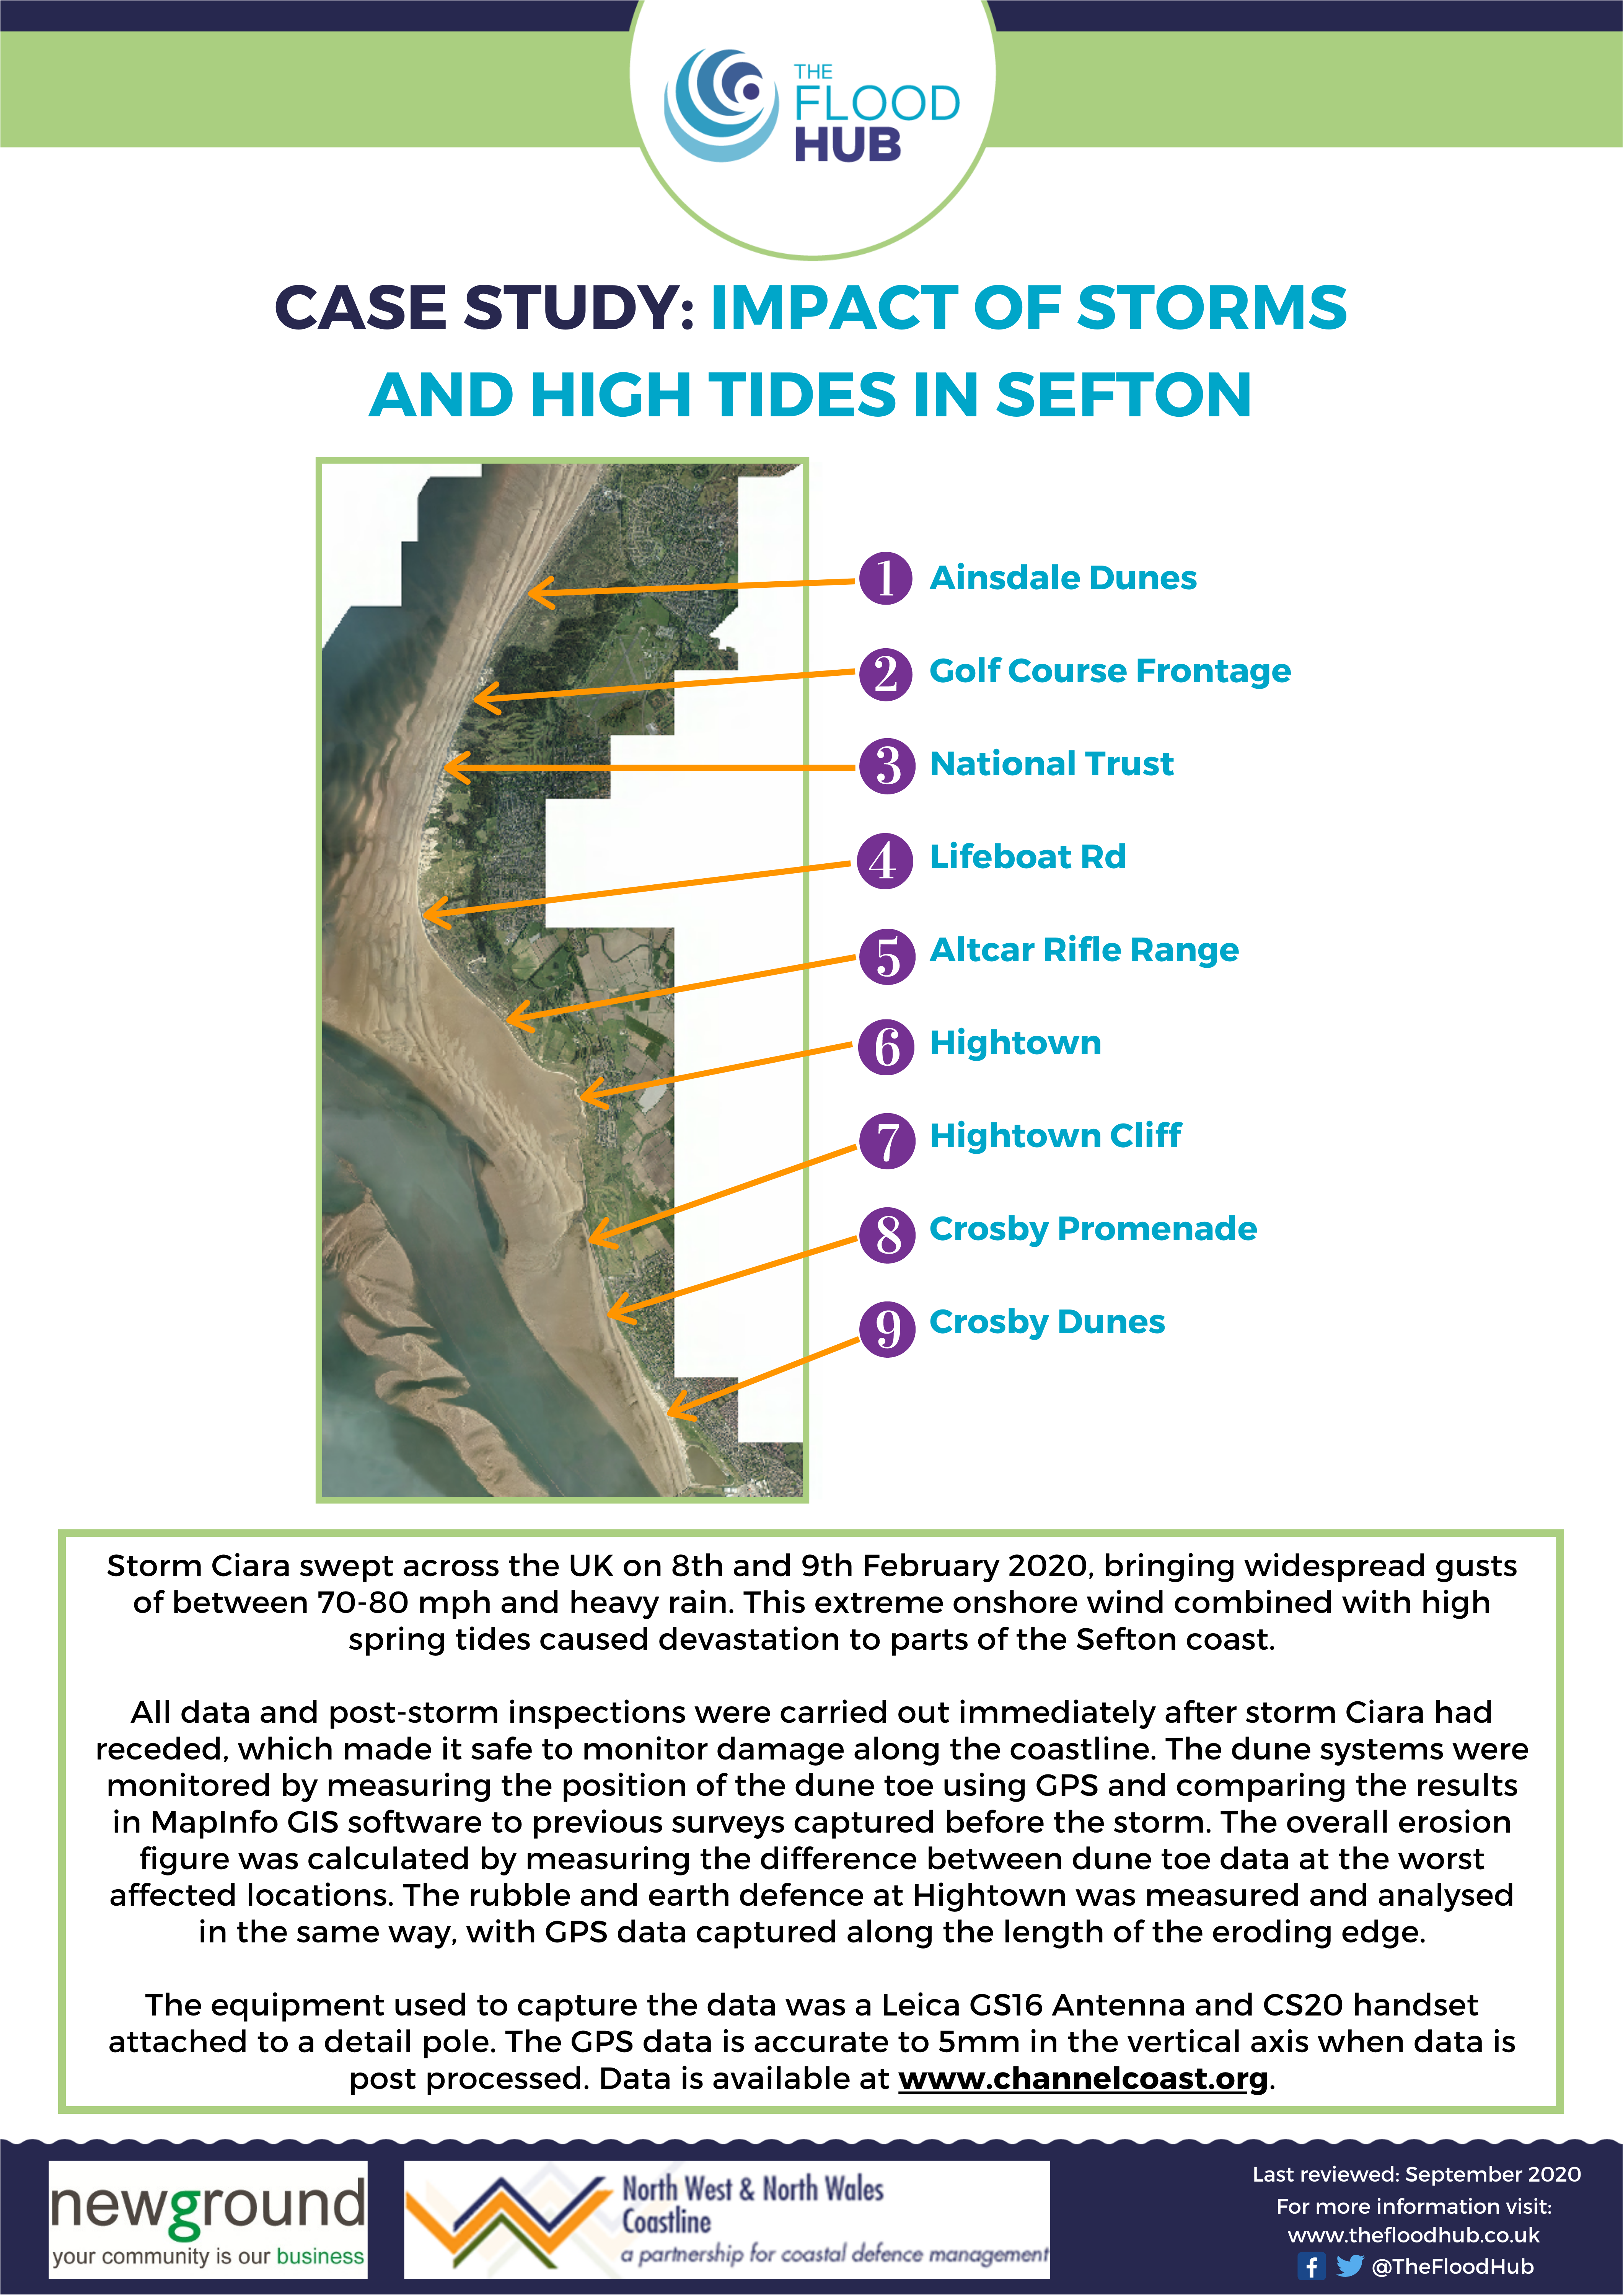 Coastal Case Study: Impact of Storms and High Tides in Sefton